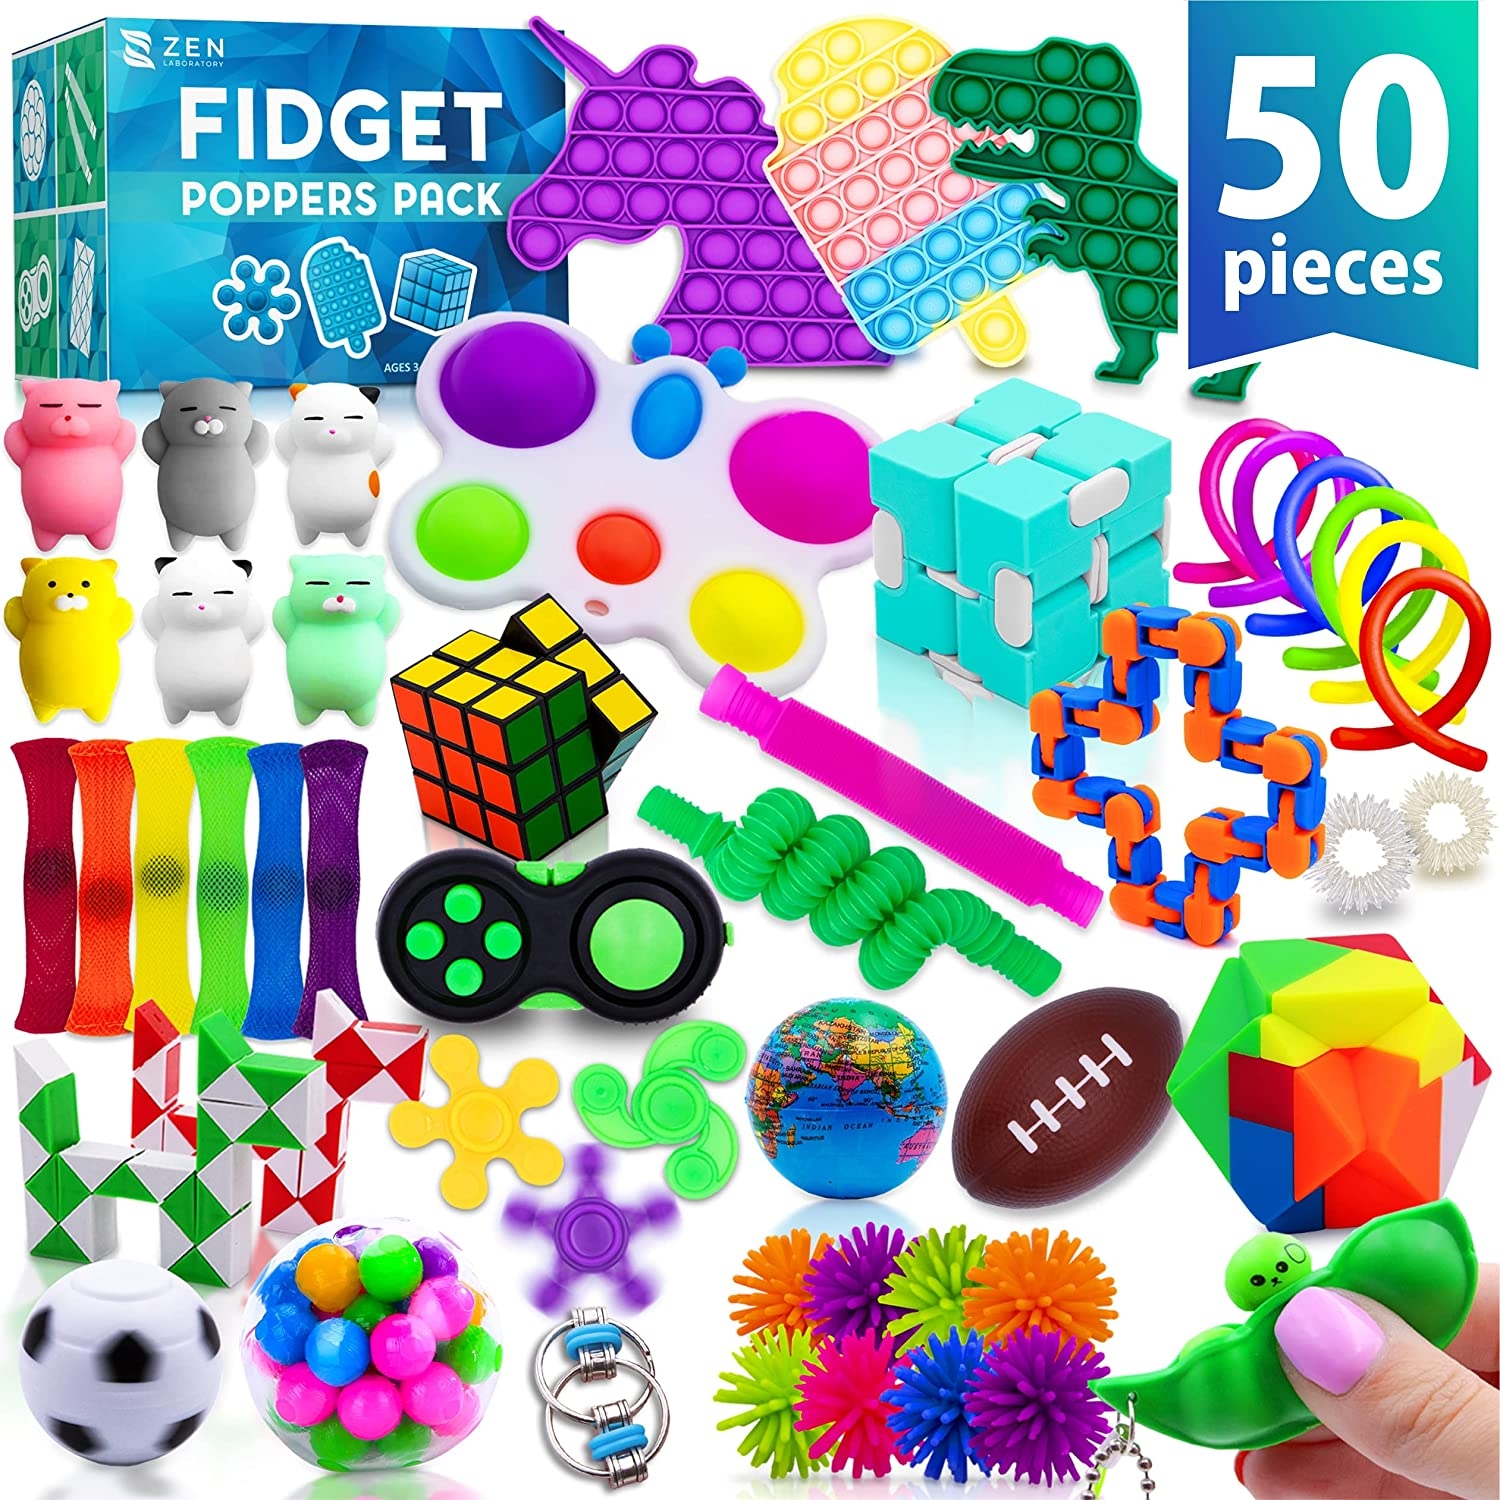 Popit, Pop it Toy, Pops, Pop pop, Pop Toy, Pop it Toys for Kids